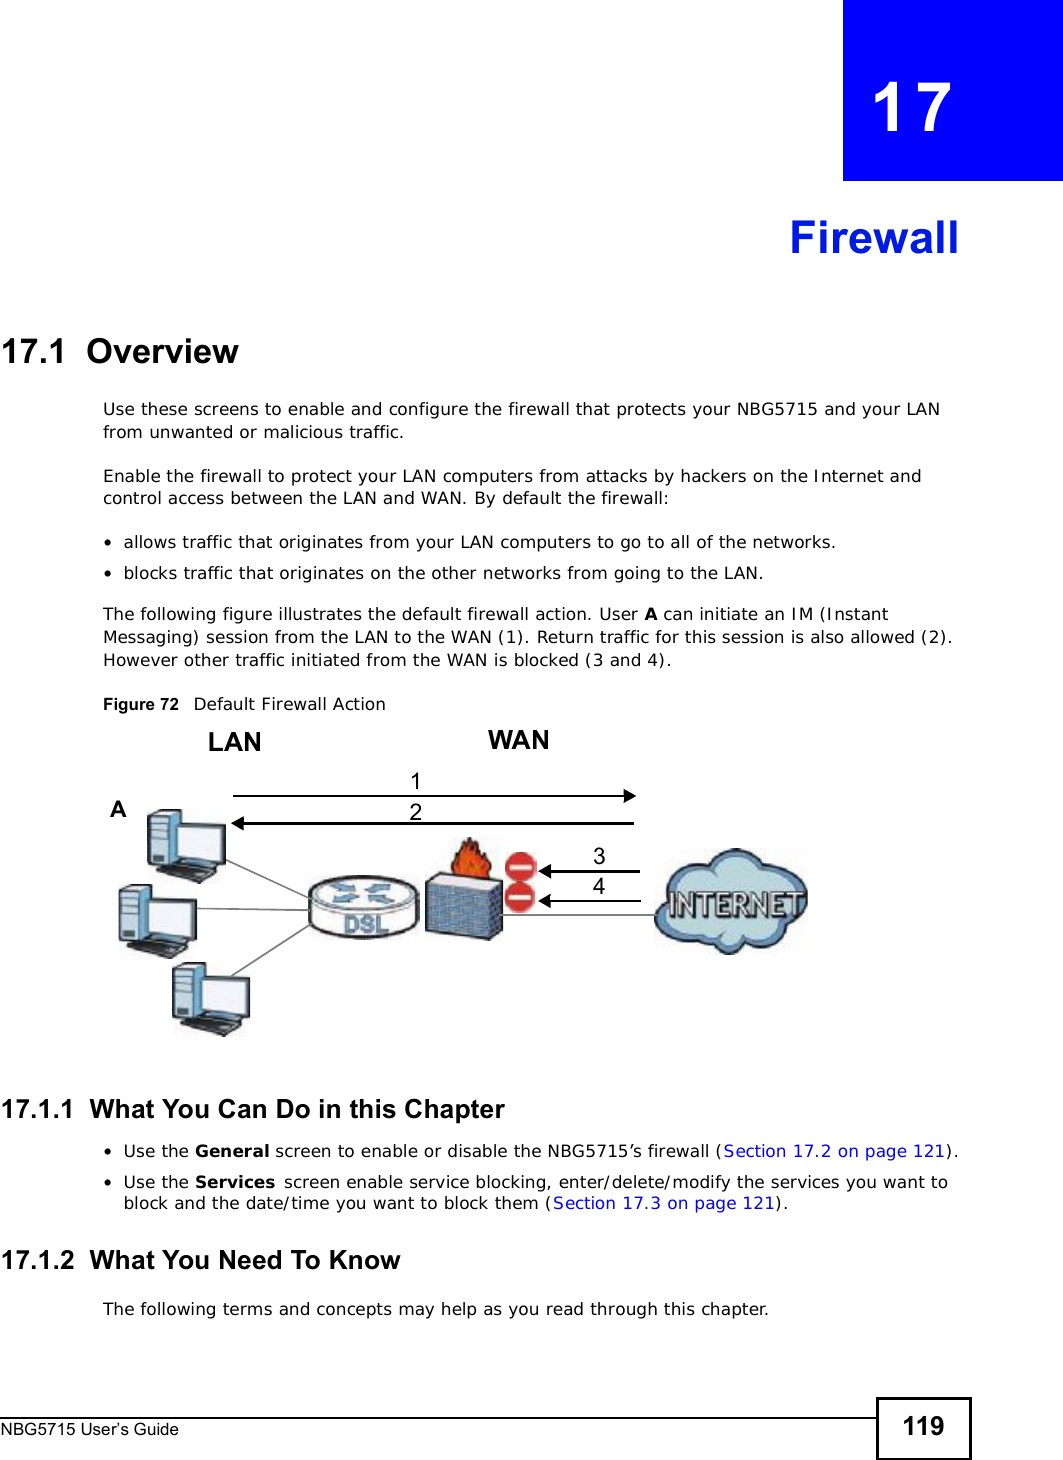 NBG5715 User’s Guide 119CHAPTER   17Firewall17.1  OverviewUse these screens to enable and configure the firewall that protects your NBG5715 and your LAN from unwanted or malicious traffic.Enable the firewall to protect your LAN computers from attacks by hackers on the Internet and control access between the LAN and WAN. By default the firewall:•allows traffic that originates from your LAN computers to go to all of the networks. •blocks traffic that originates on the other networks from going to the LAN. The following figure illustrates the default firewall action. User A can initiate an IM (Instant Messaging) session from the LAN to the WAN (1). Return traffic for this session is also allowed (2). However other traffic initiated from the WAN is blocked (3 and 4).Figure 72   Default Firewall Action17.1.1  What You Can Do in this Chapter•Use the General screen to enable or disable the NBG5715’s firewall (Section 17.2 on page 121).•Use the Services screen enable service blocking, enter/delete/modify the services you want to block and the date/time you want to block them (Section 17.3 on page 121).17.1.2  What You Need To KnowThe following terms and concepts may help as you read through this chapter.WANLAN3412A